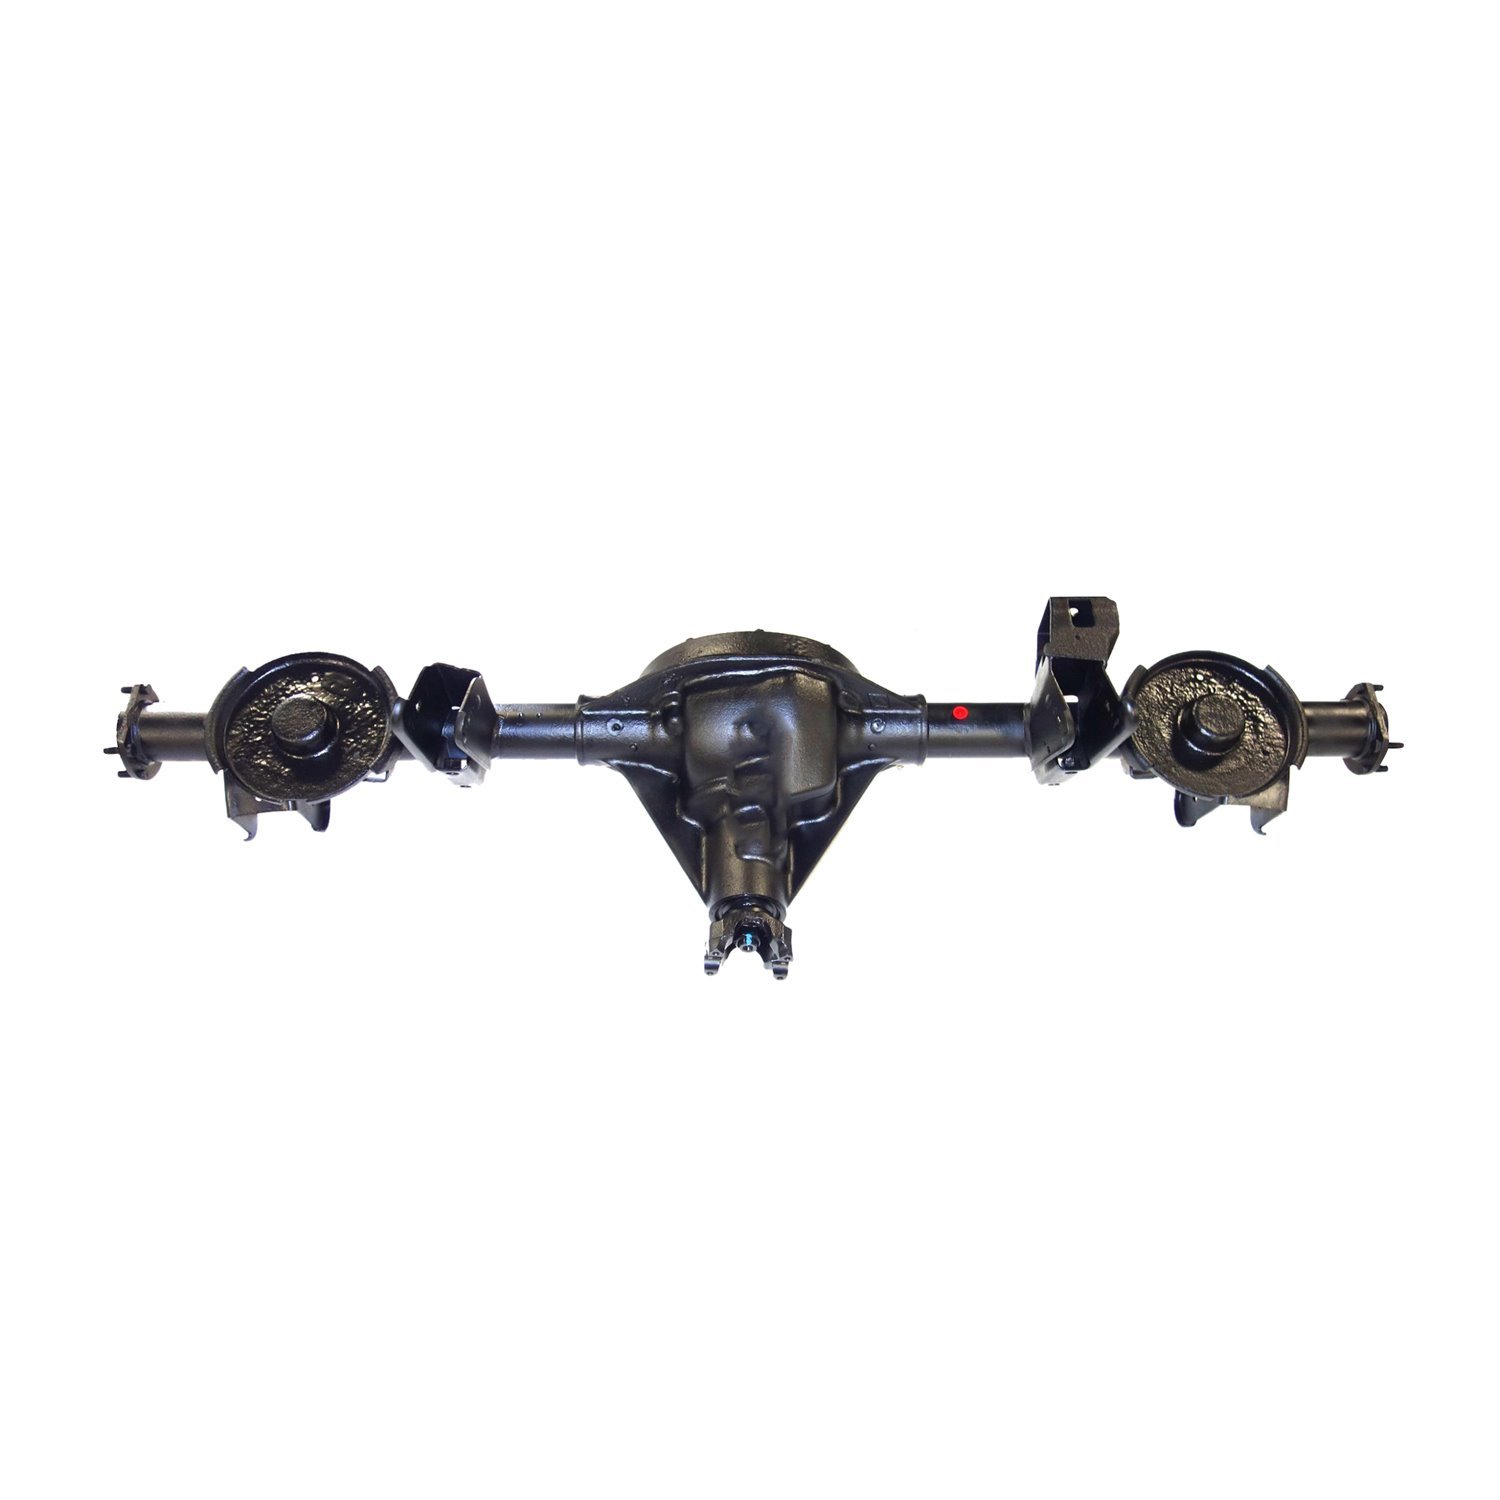 Remanufactured Complete Axle Assembly for Dana 35 03-05 Jeep Wrangler 3.73 Ratio w/o ABS